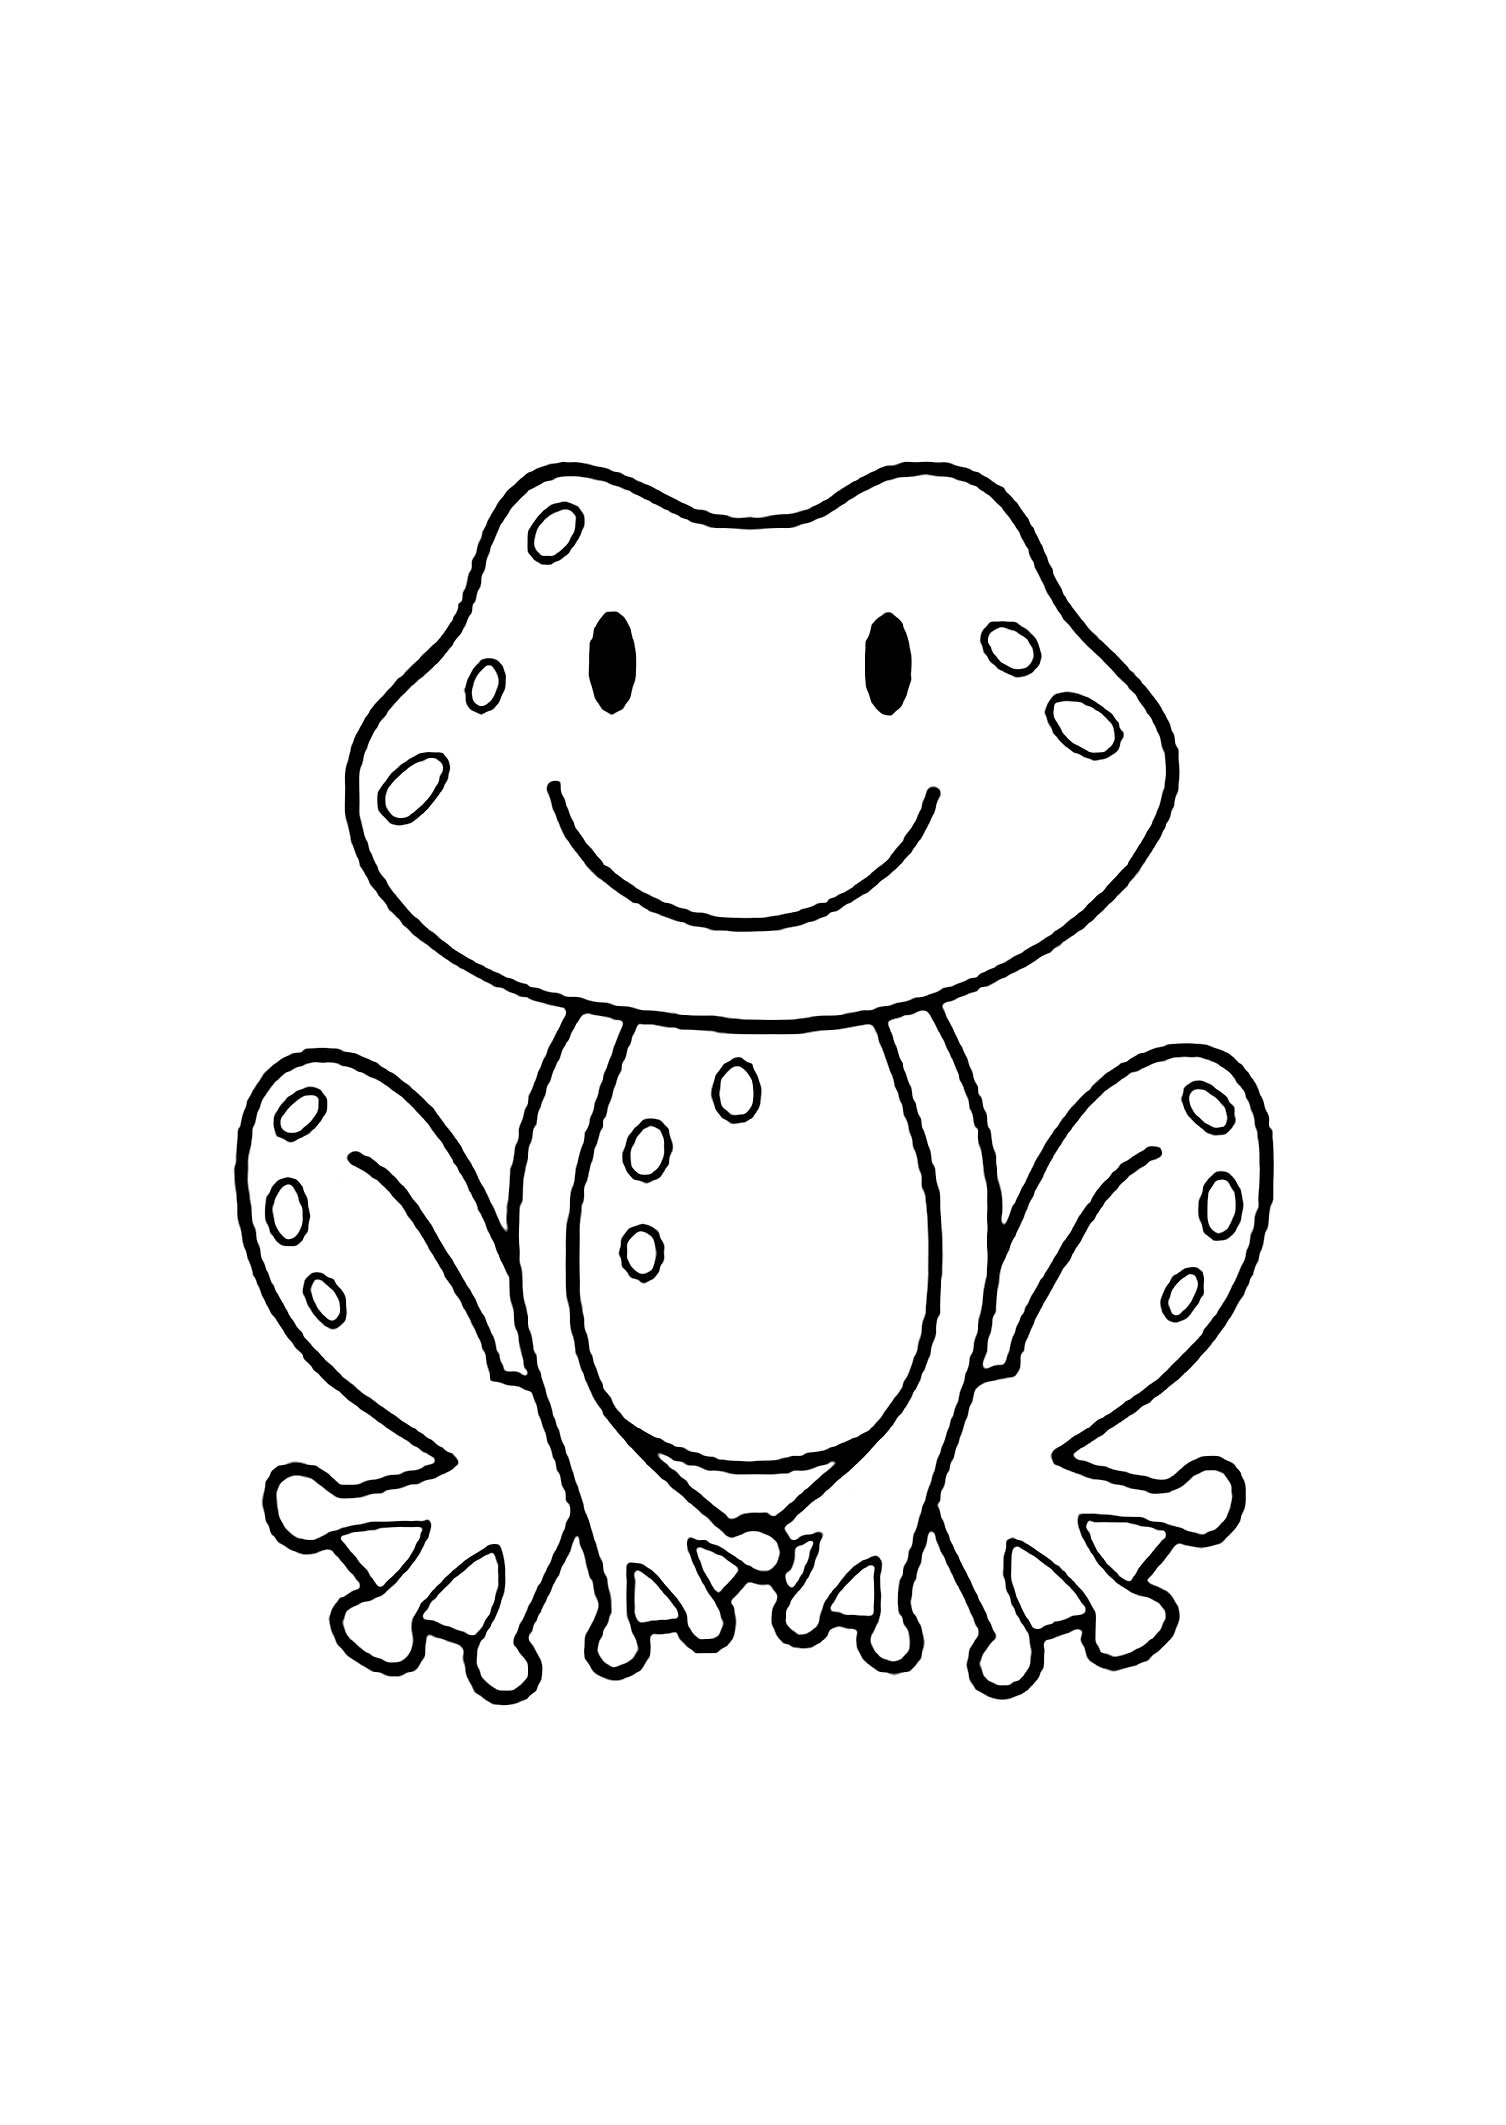 Frogs to color for children Frogs Kids Coloring Pages